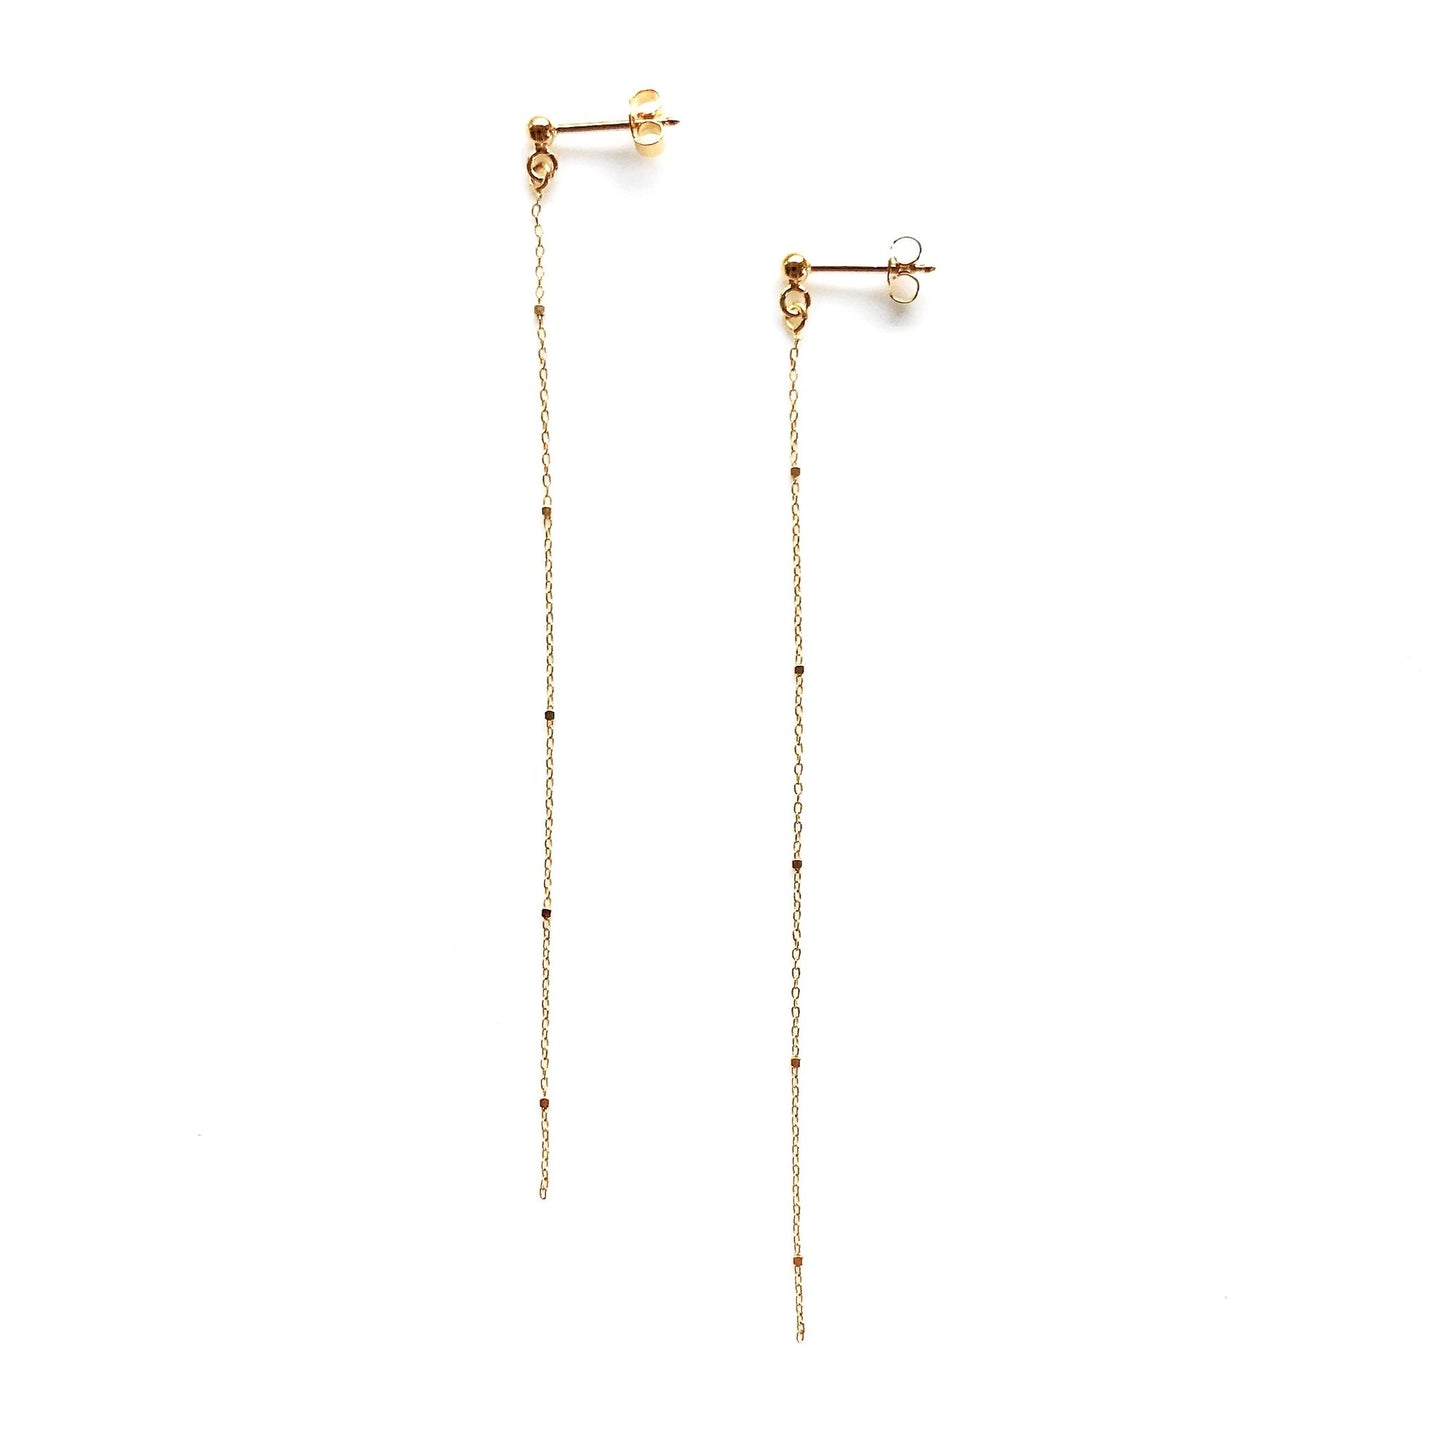 Swing Gold Earrings -  Gold Plated Silver